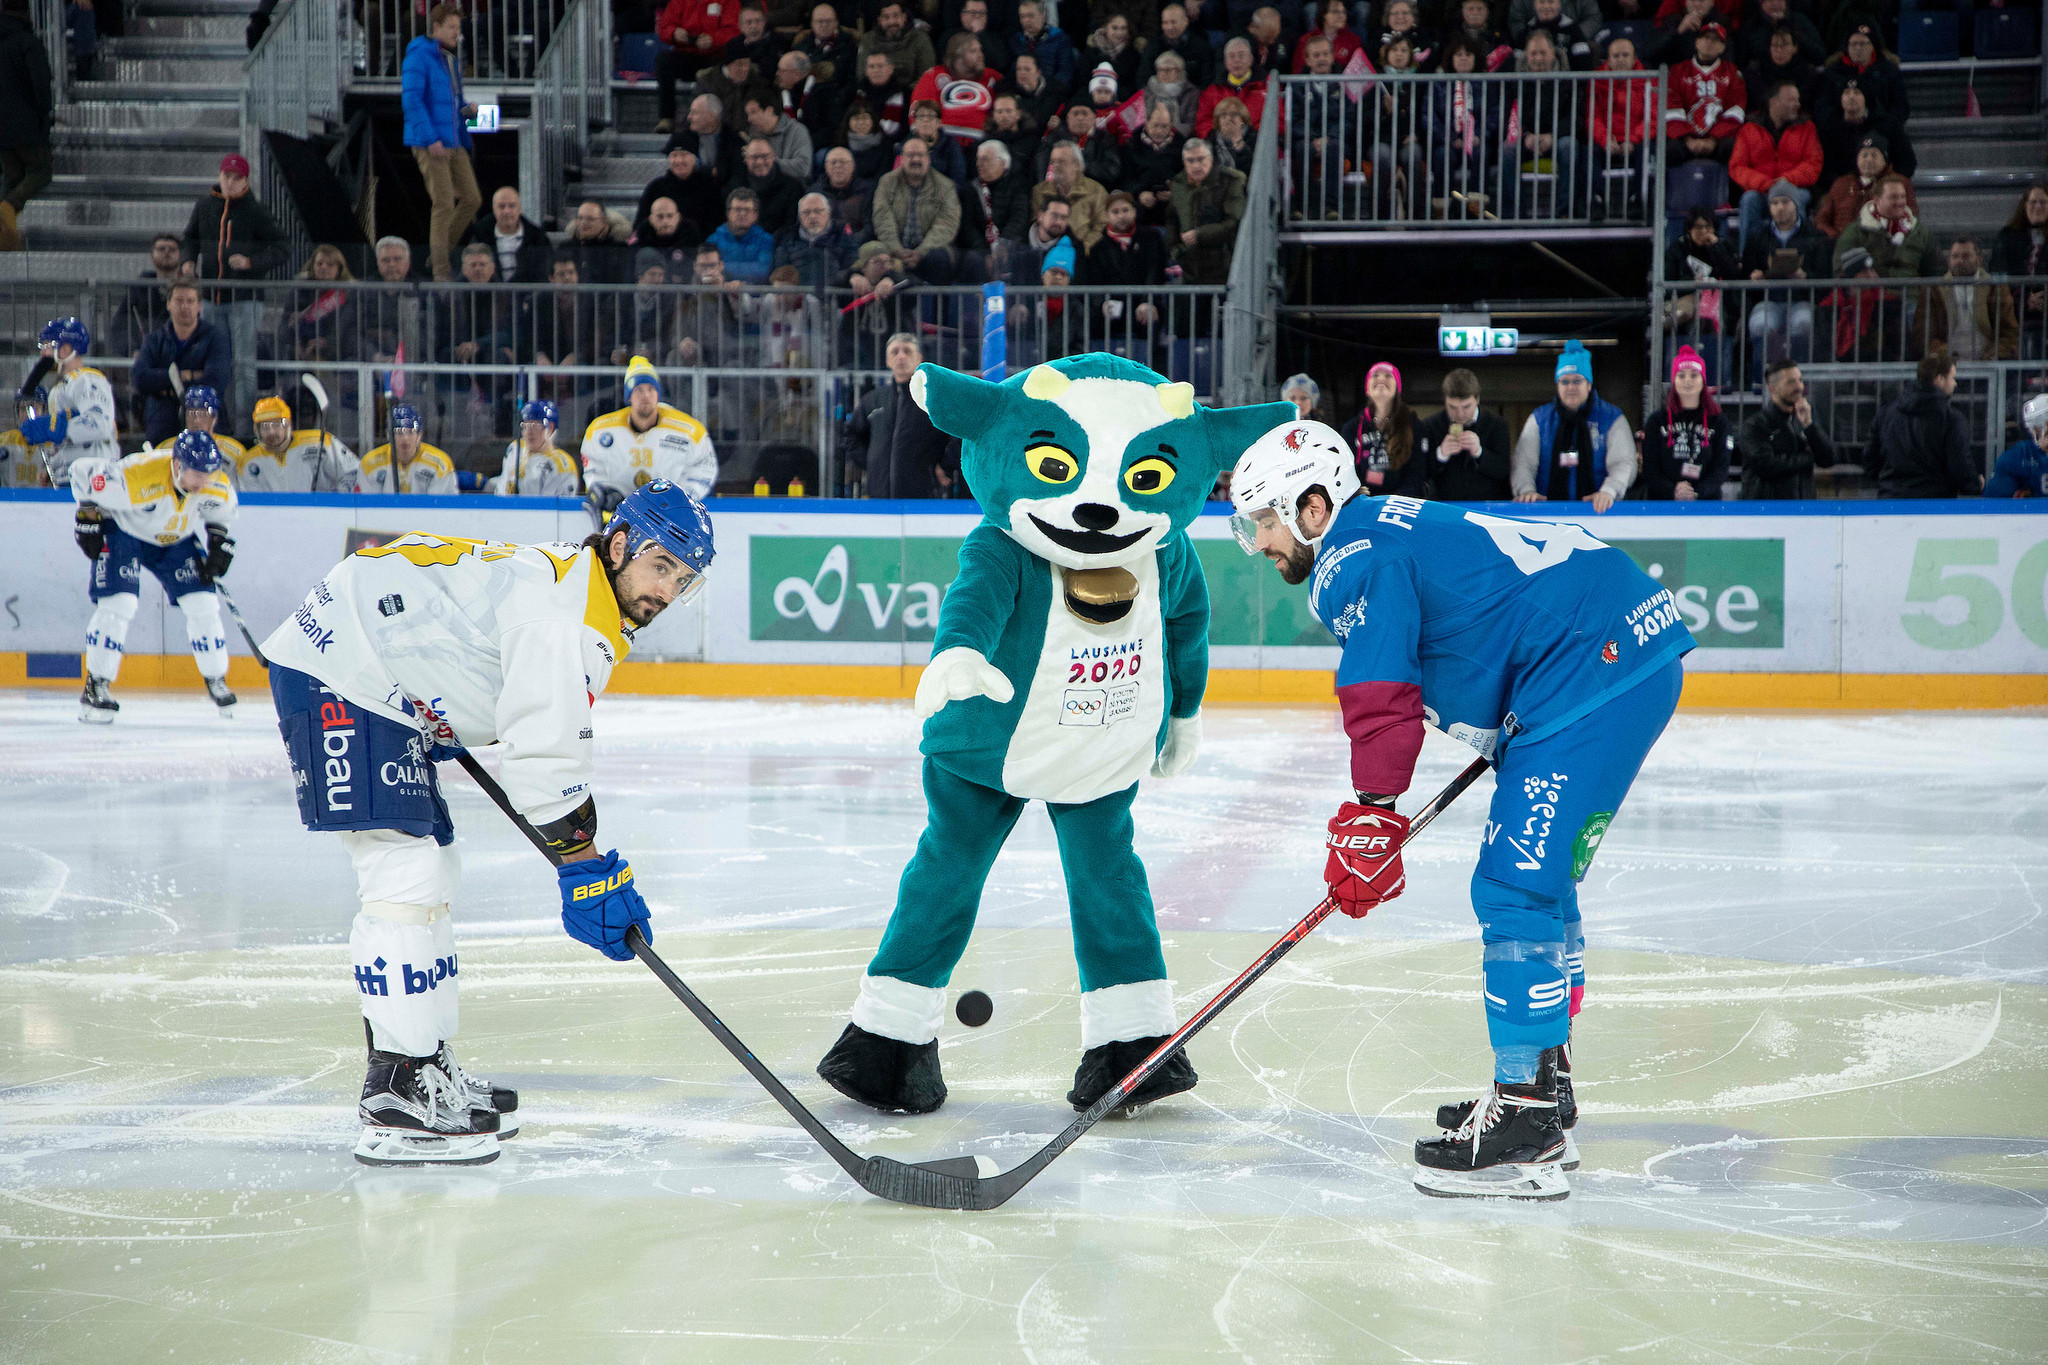 Lausanne 2020 unveiled their mascot, a cross between a dog, goat and cow, last week ©IOC